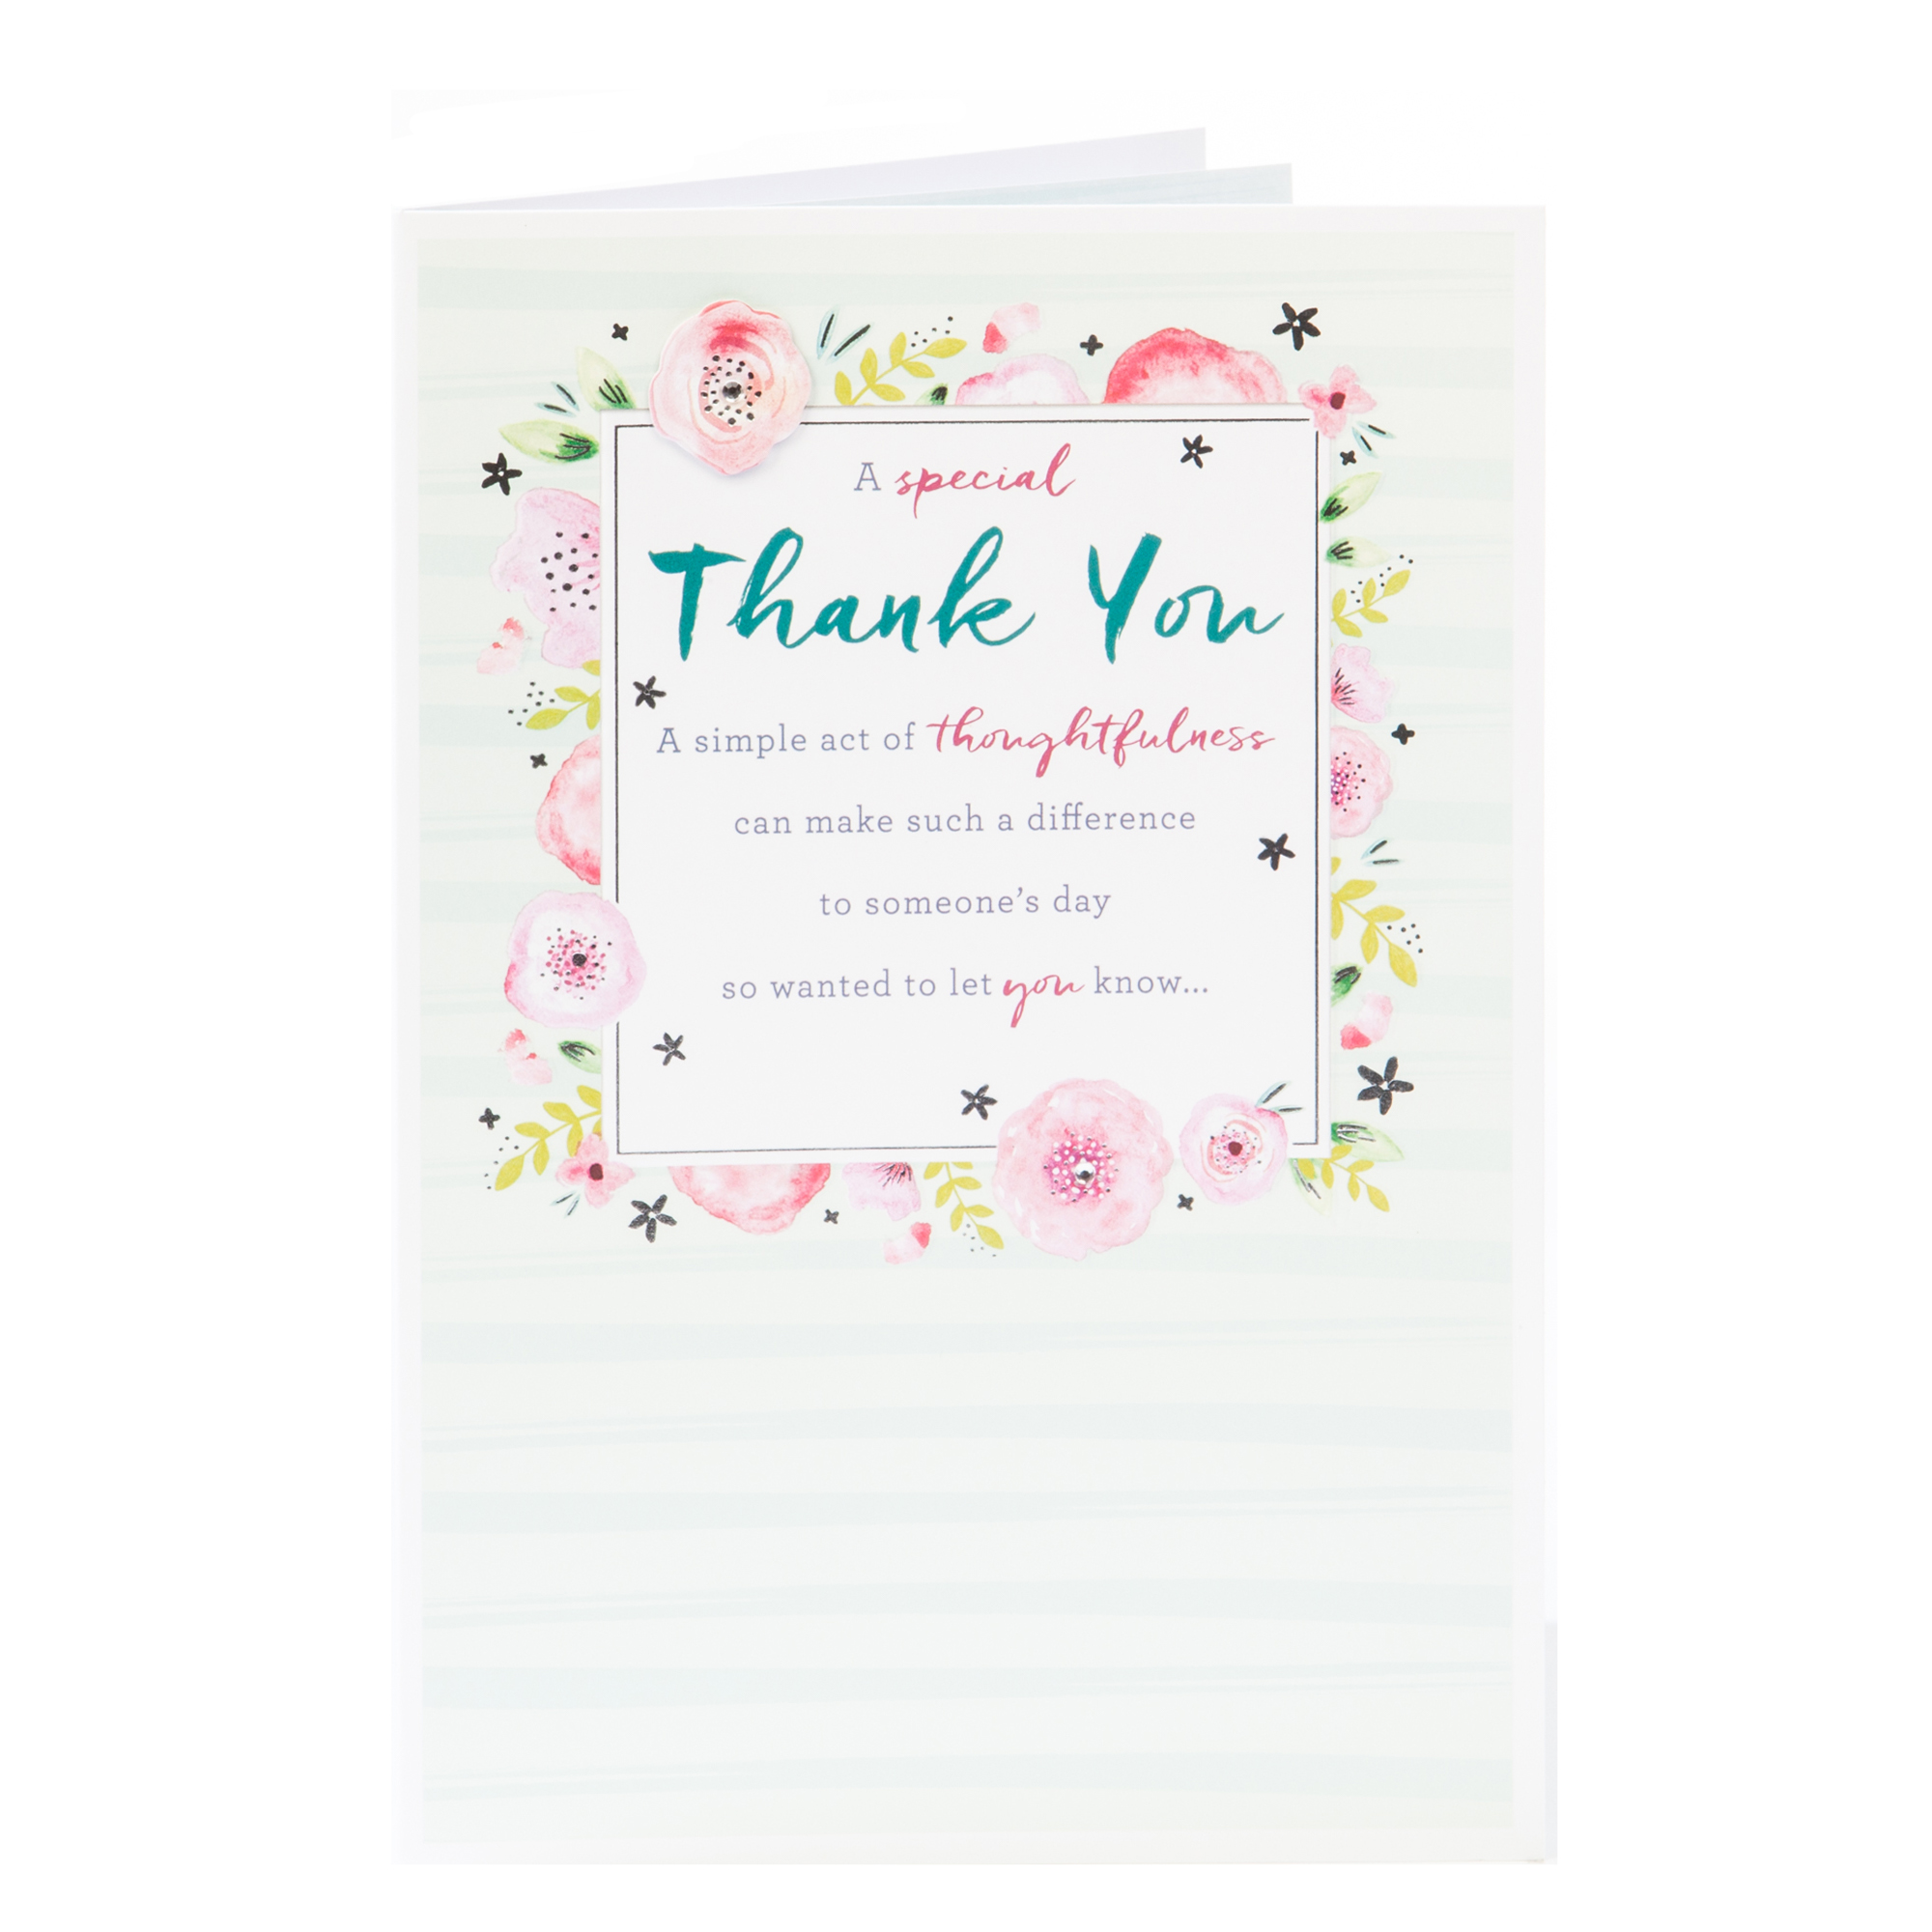 Thank You Card - A Single Act Of Thoughtfulness 